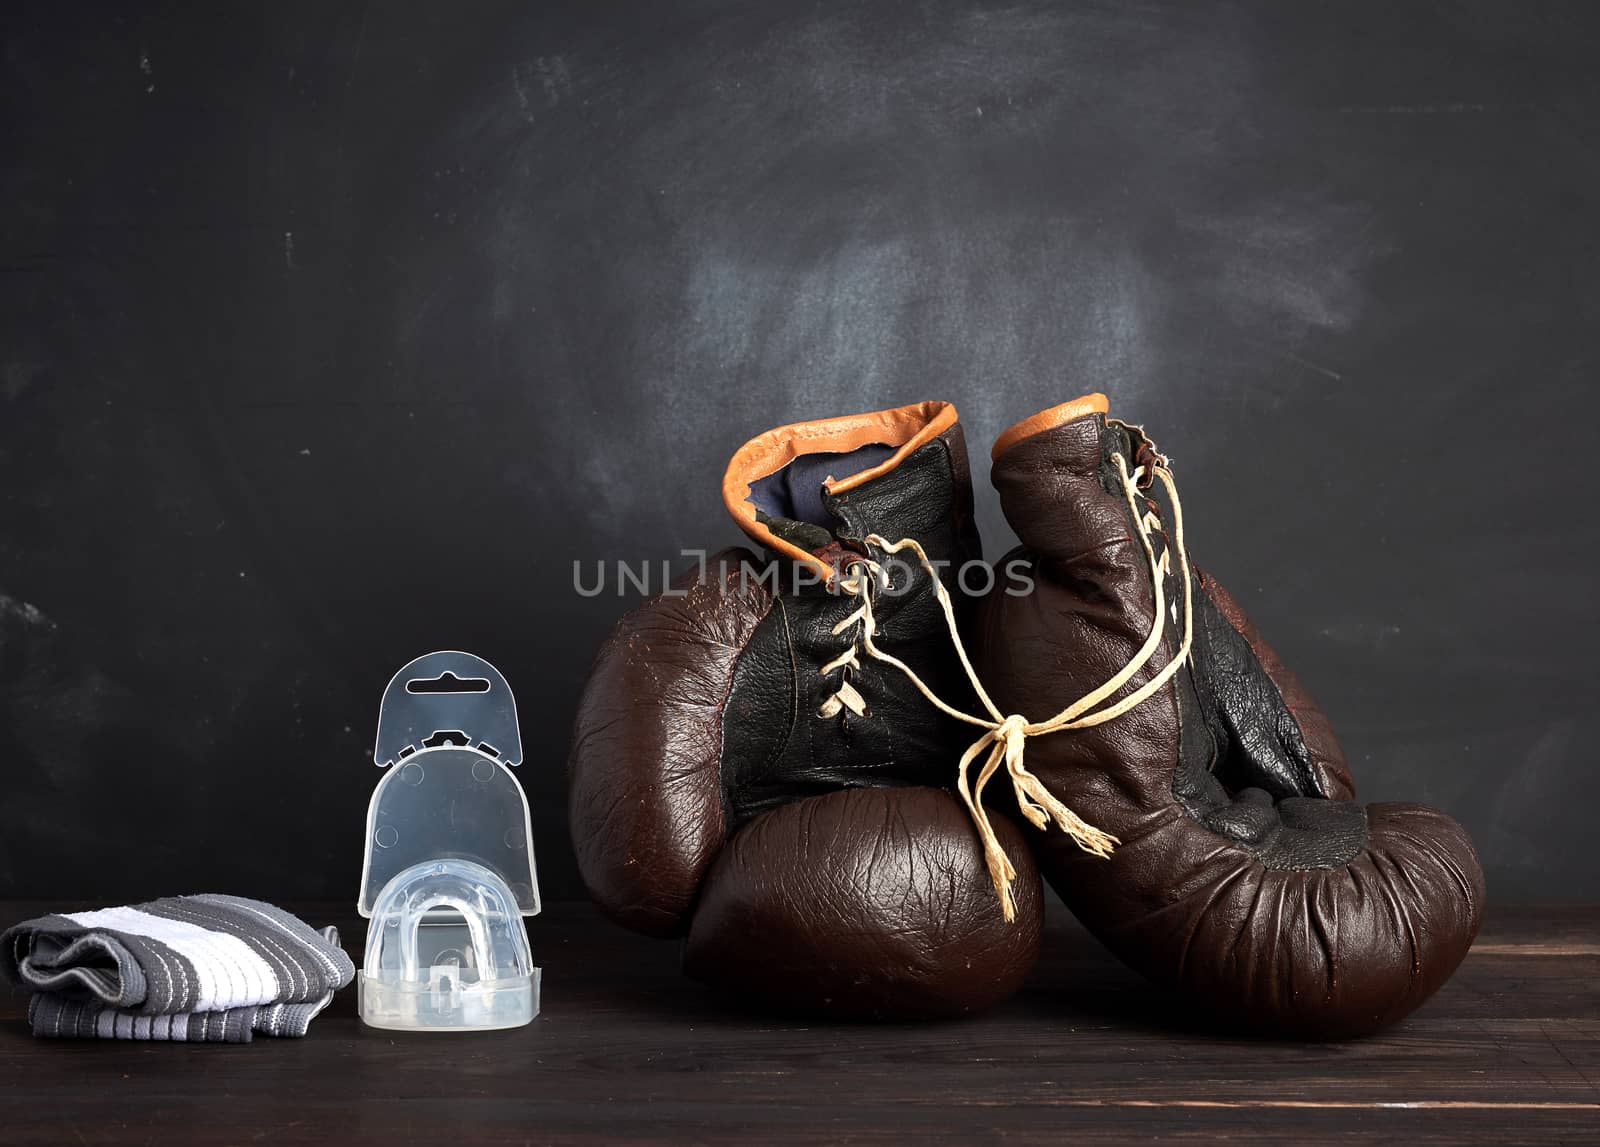 pair of brown leather vintage boxing gloves, silicone cap and wrist bandage, wooden background, sports equipment